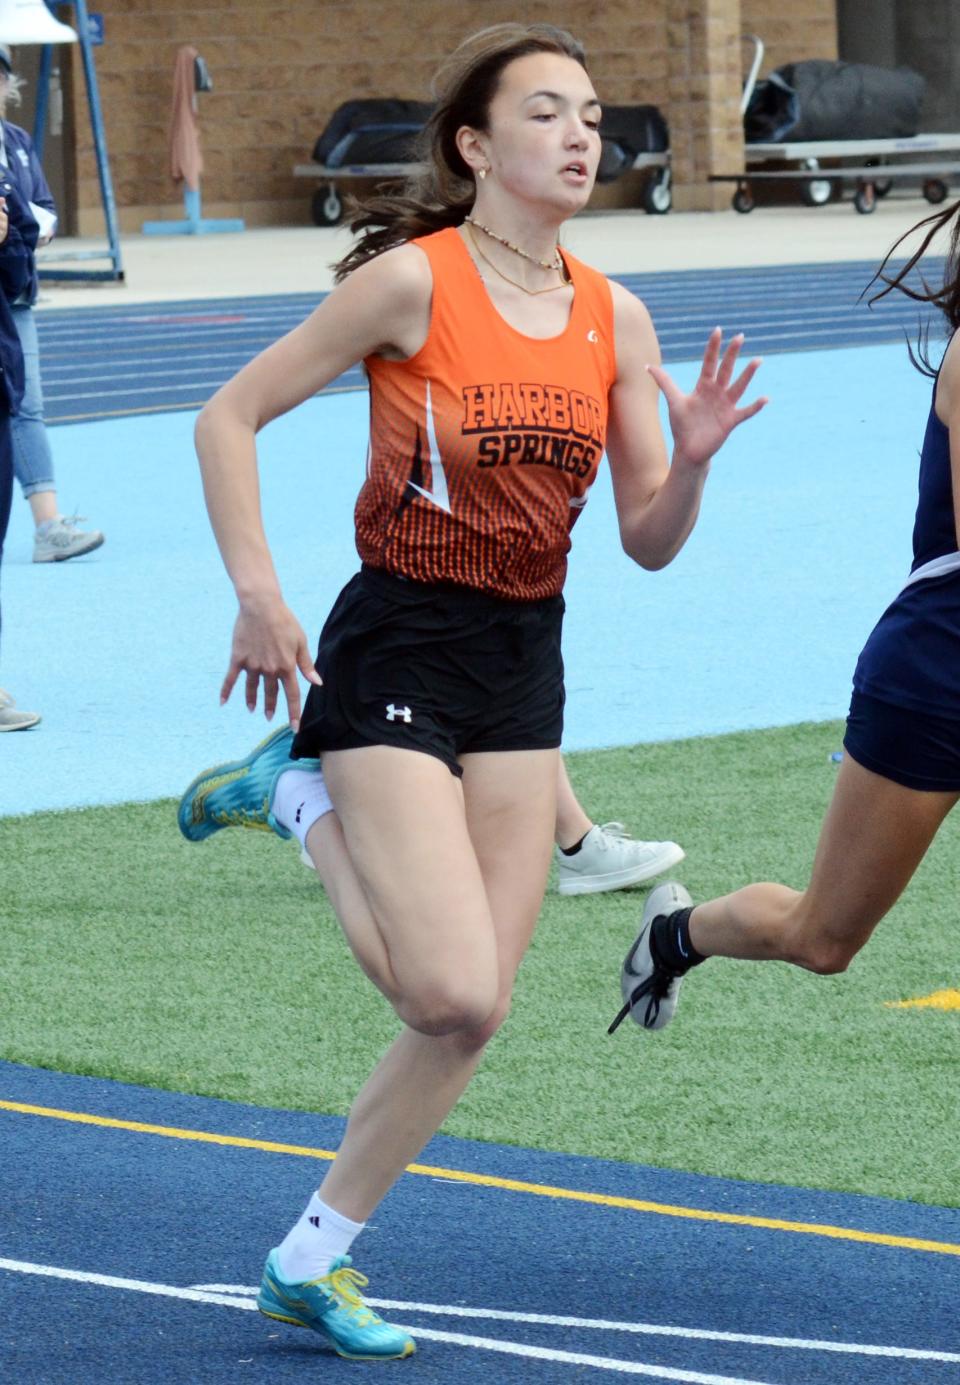 Harbor Springs' Claire Ranney helped the Rams to a runner-up finish in the 1600 meter relay at the LMC Championships.